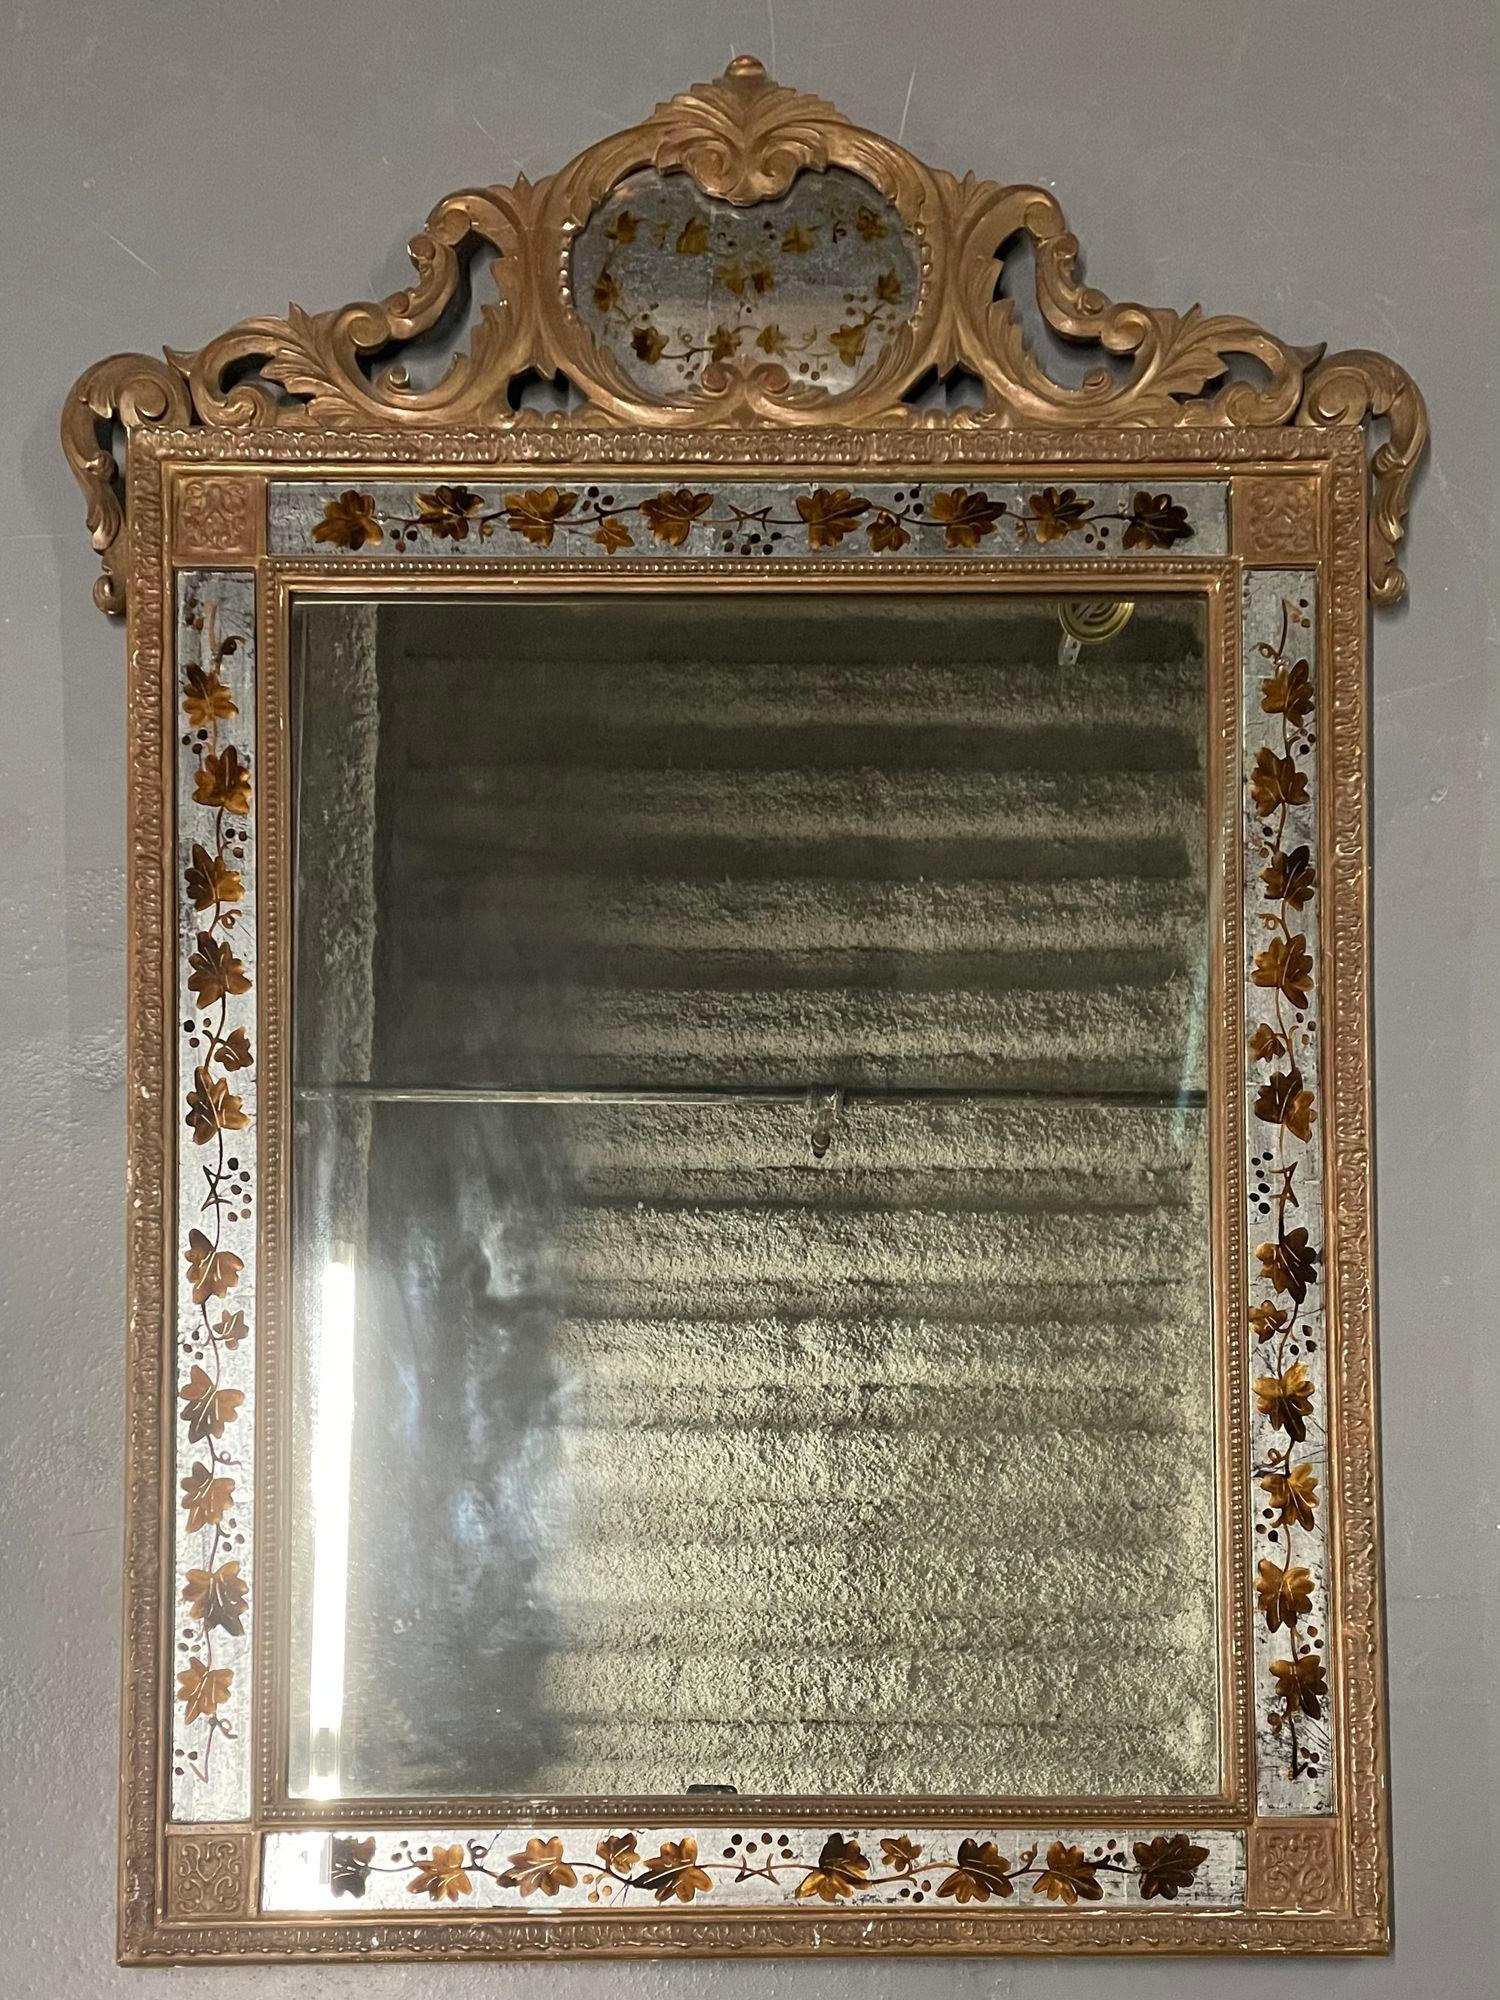 Hollywood Regency Eglomise Decorated Maison Jansen Wall, Pier Mirror

A Jansen Eglomise Wall, Console or Over the Mantle Mirror. A large and impressive mirror having an eglomise silver and gold designed border flaked by giltwood framing around a